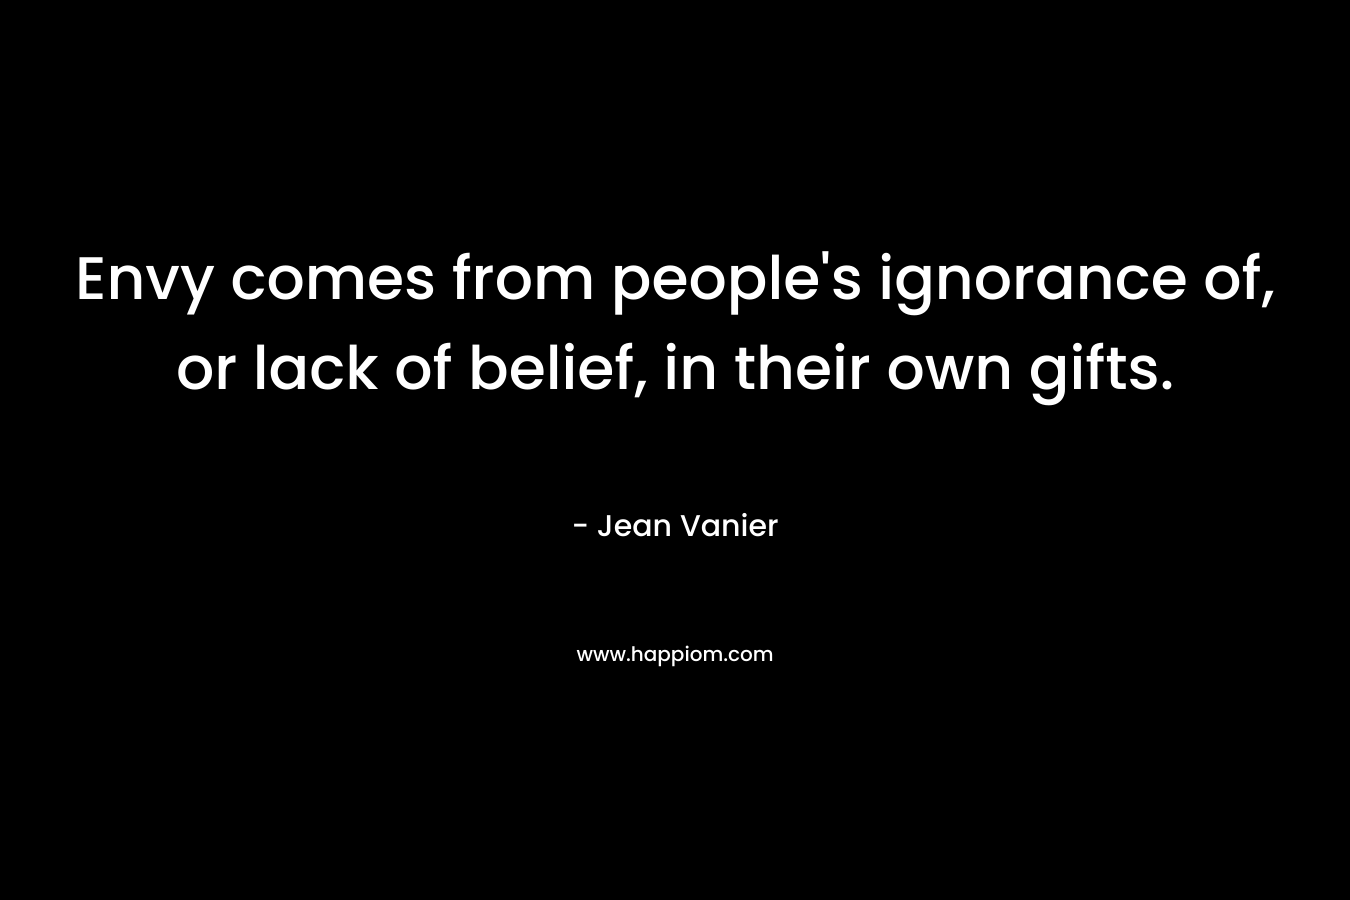 Envy comes from people’s ignorance of, or lack of belief, in their own gifts. – Jean Vanier